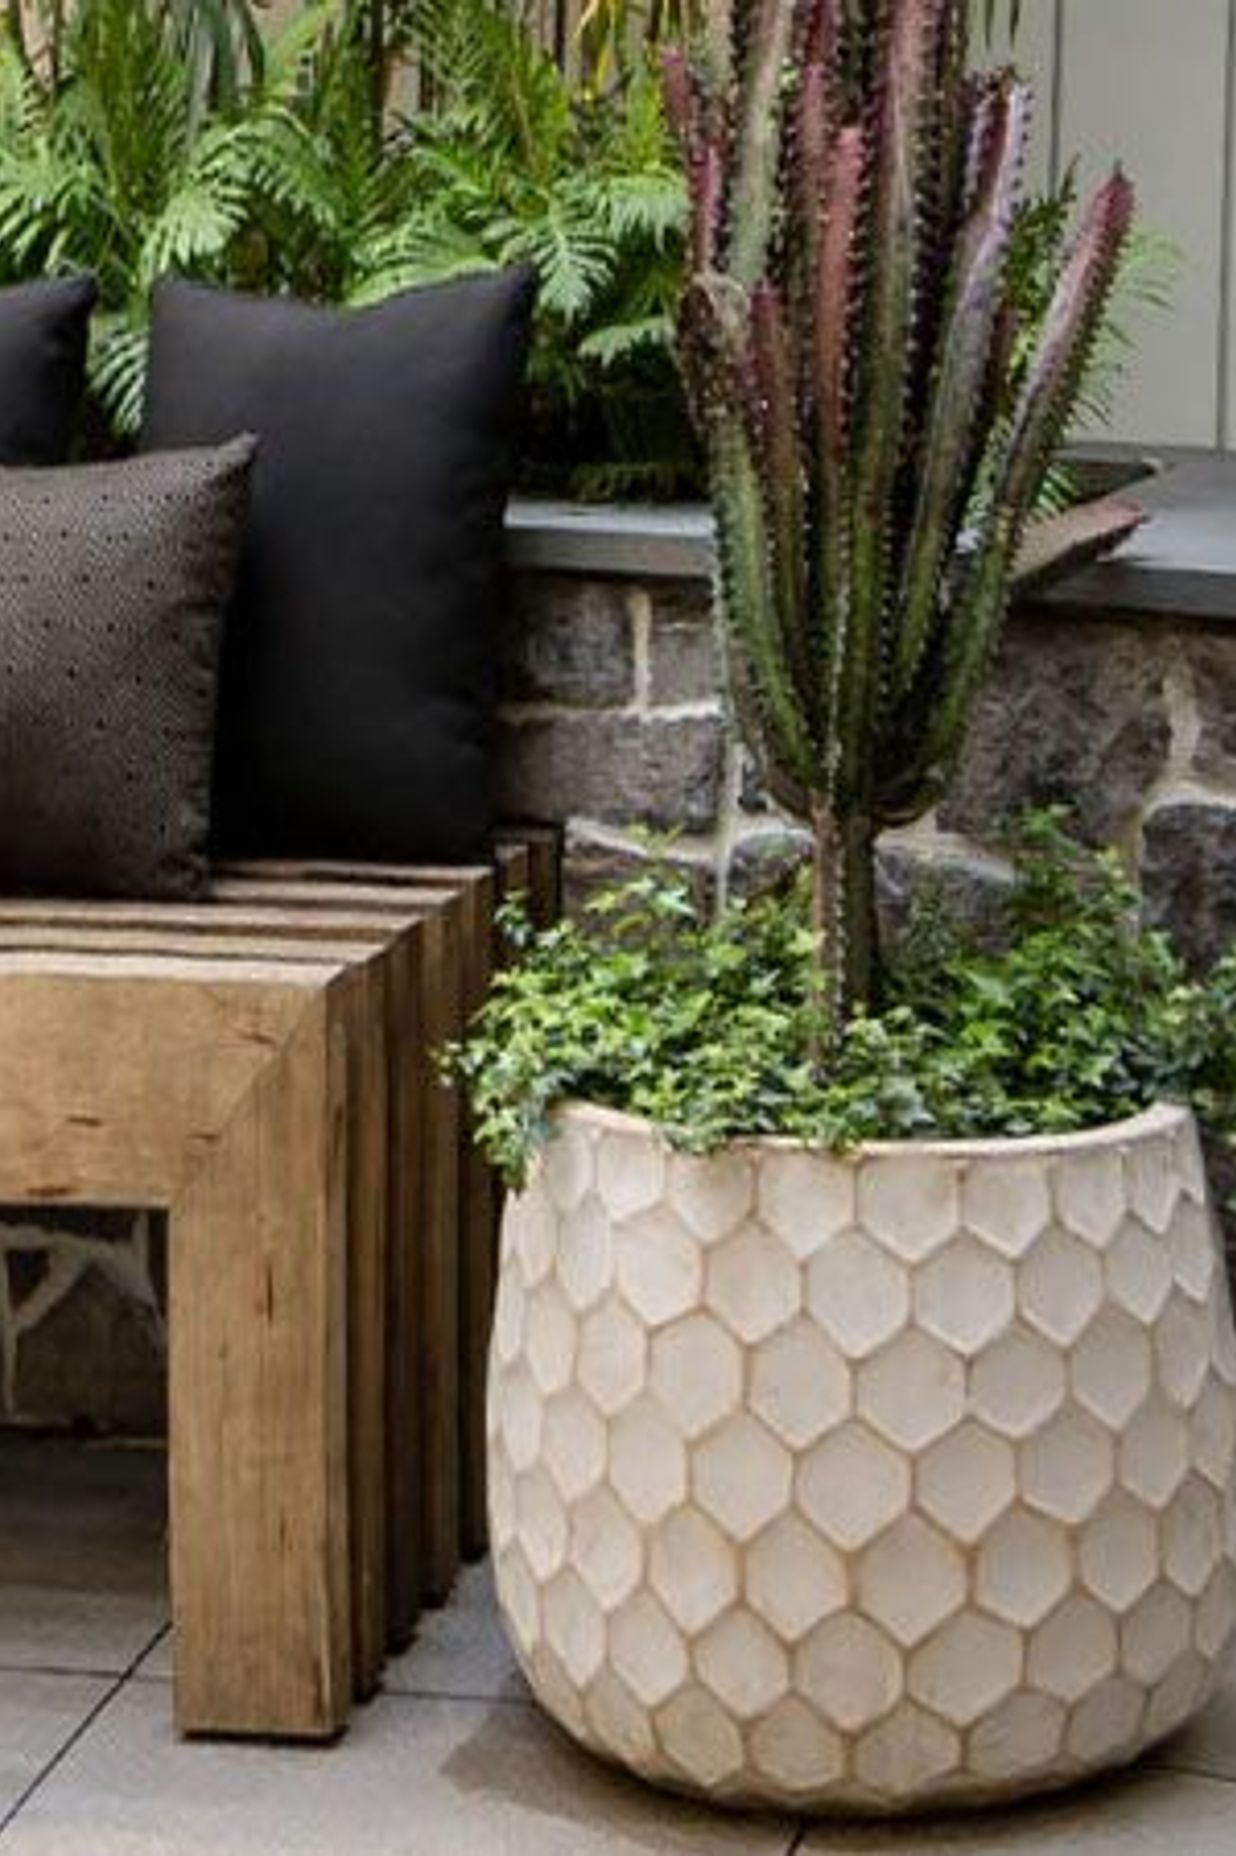 Use greenery in your outdoor room.